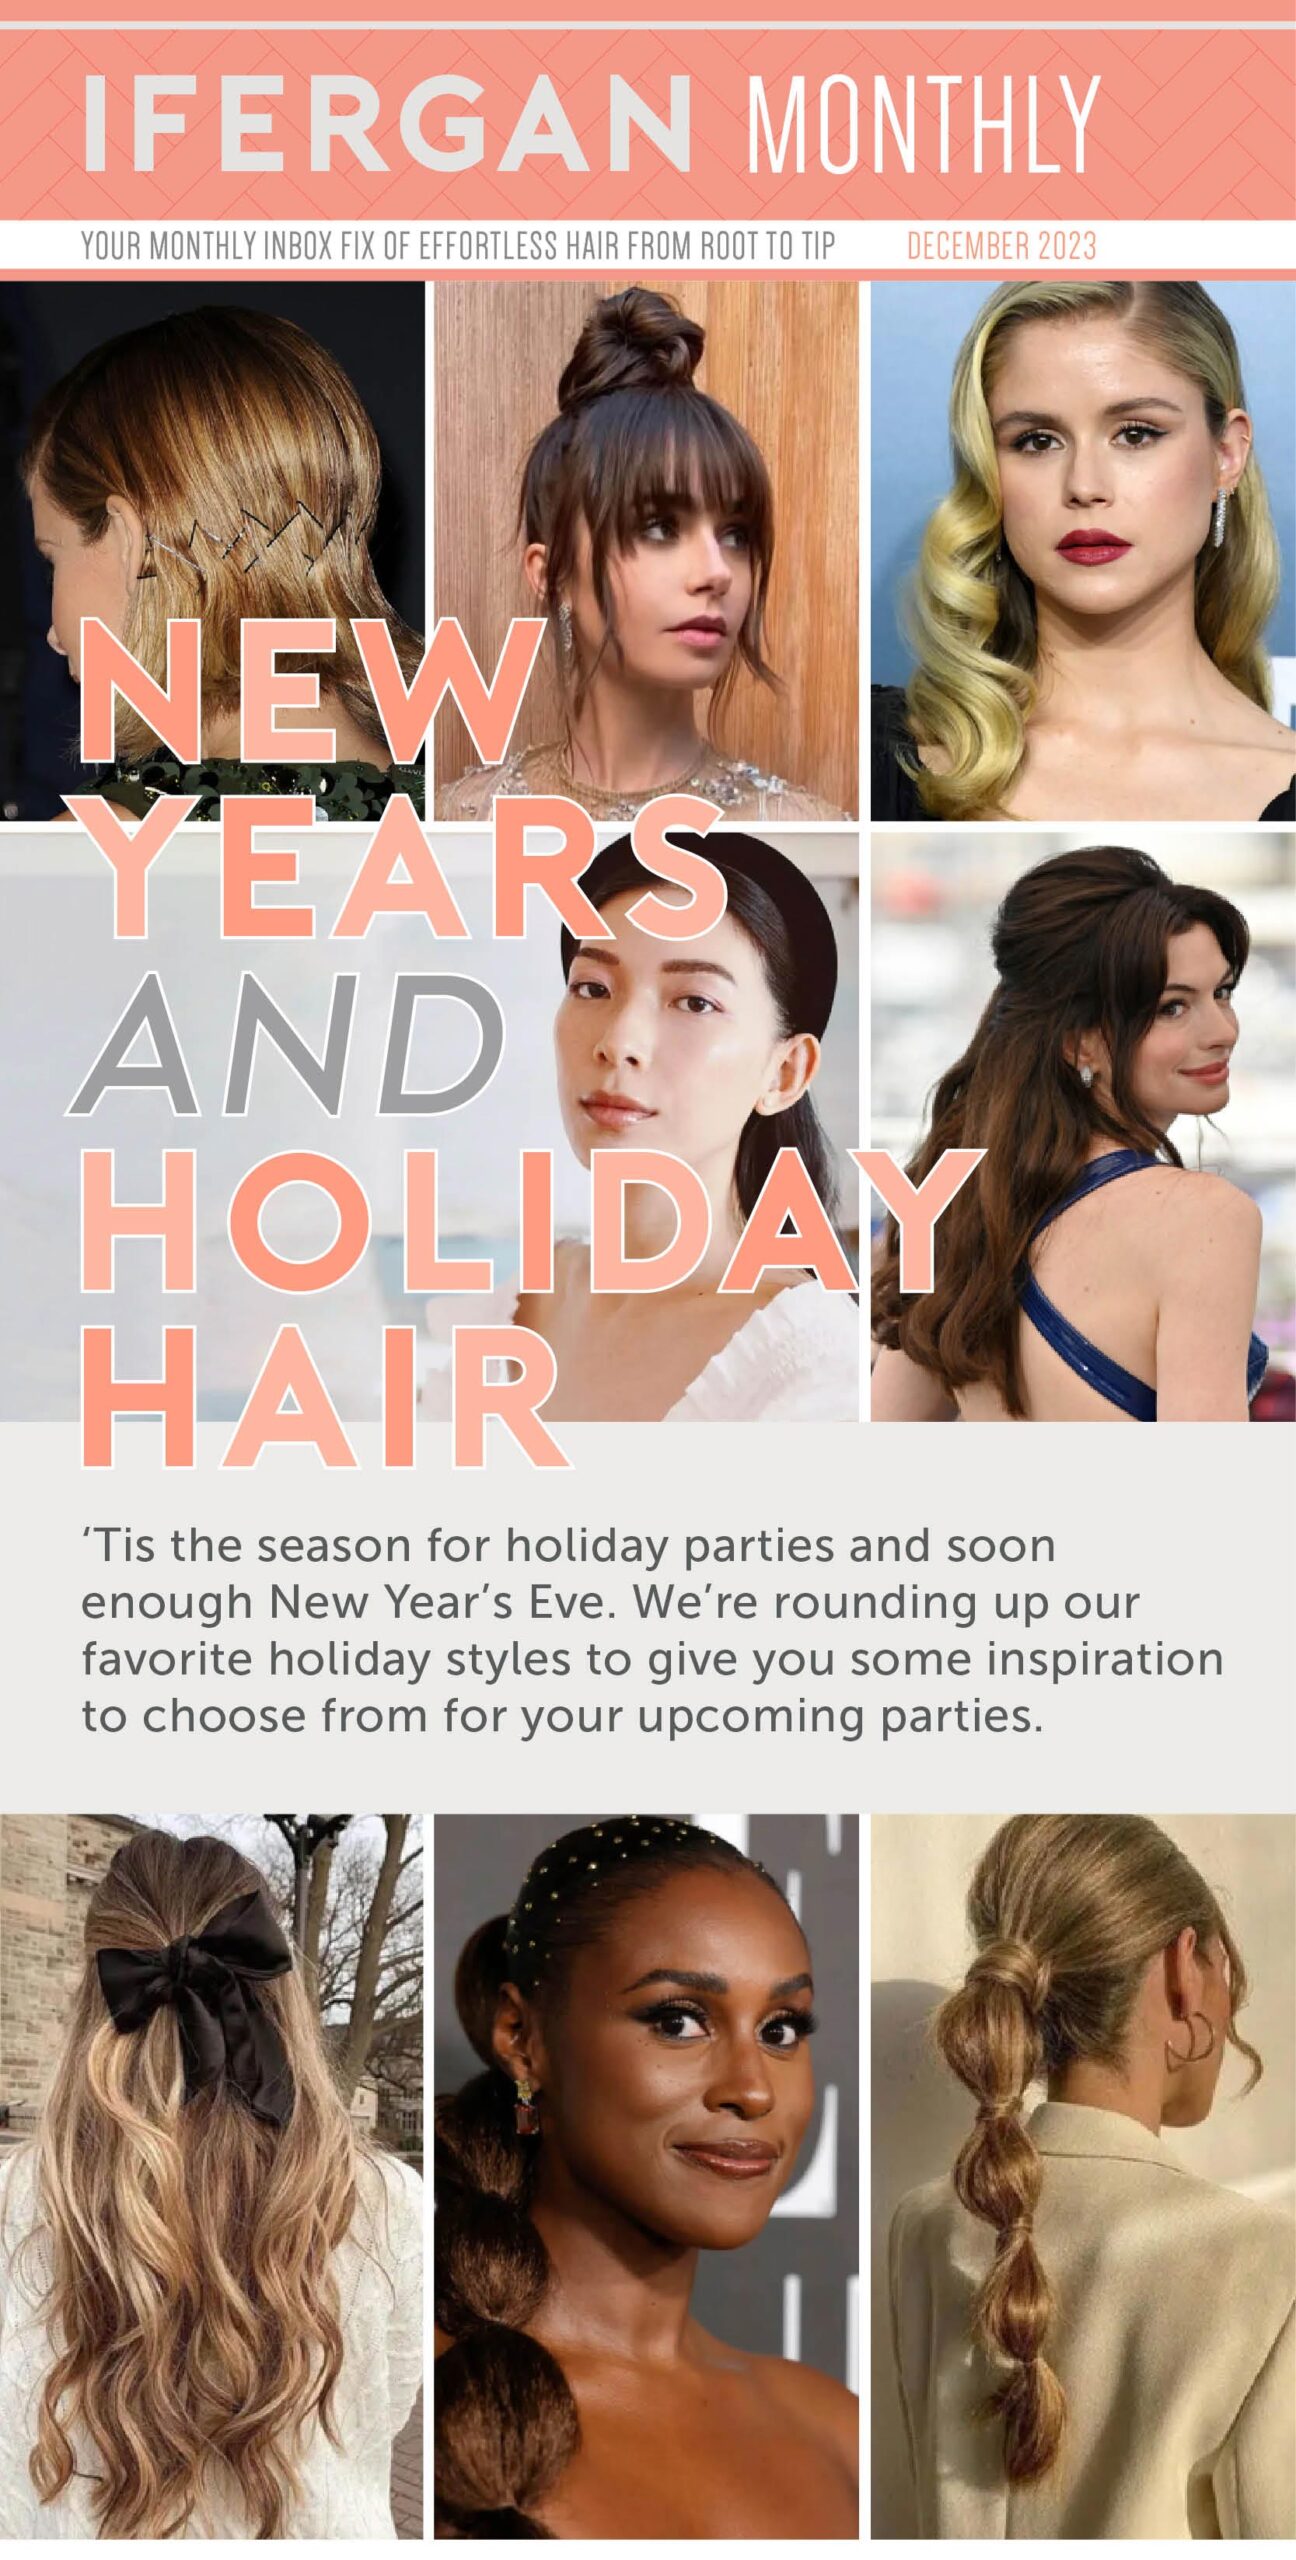 New Years and Holiday Hair ‘Tis the season for holiday parties and soon enough New Year’s Eve. We’re rounding up our favorite holiday styles to give you some inspiration to choose from for your upcoming parties.